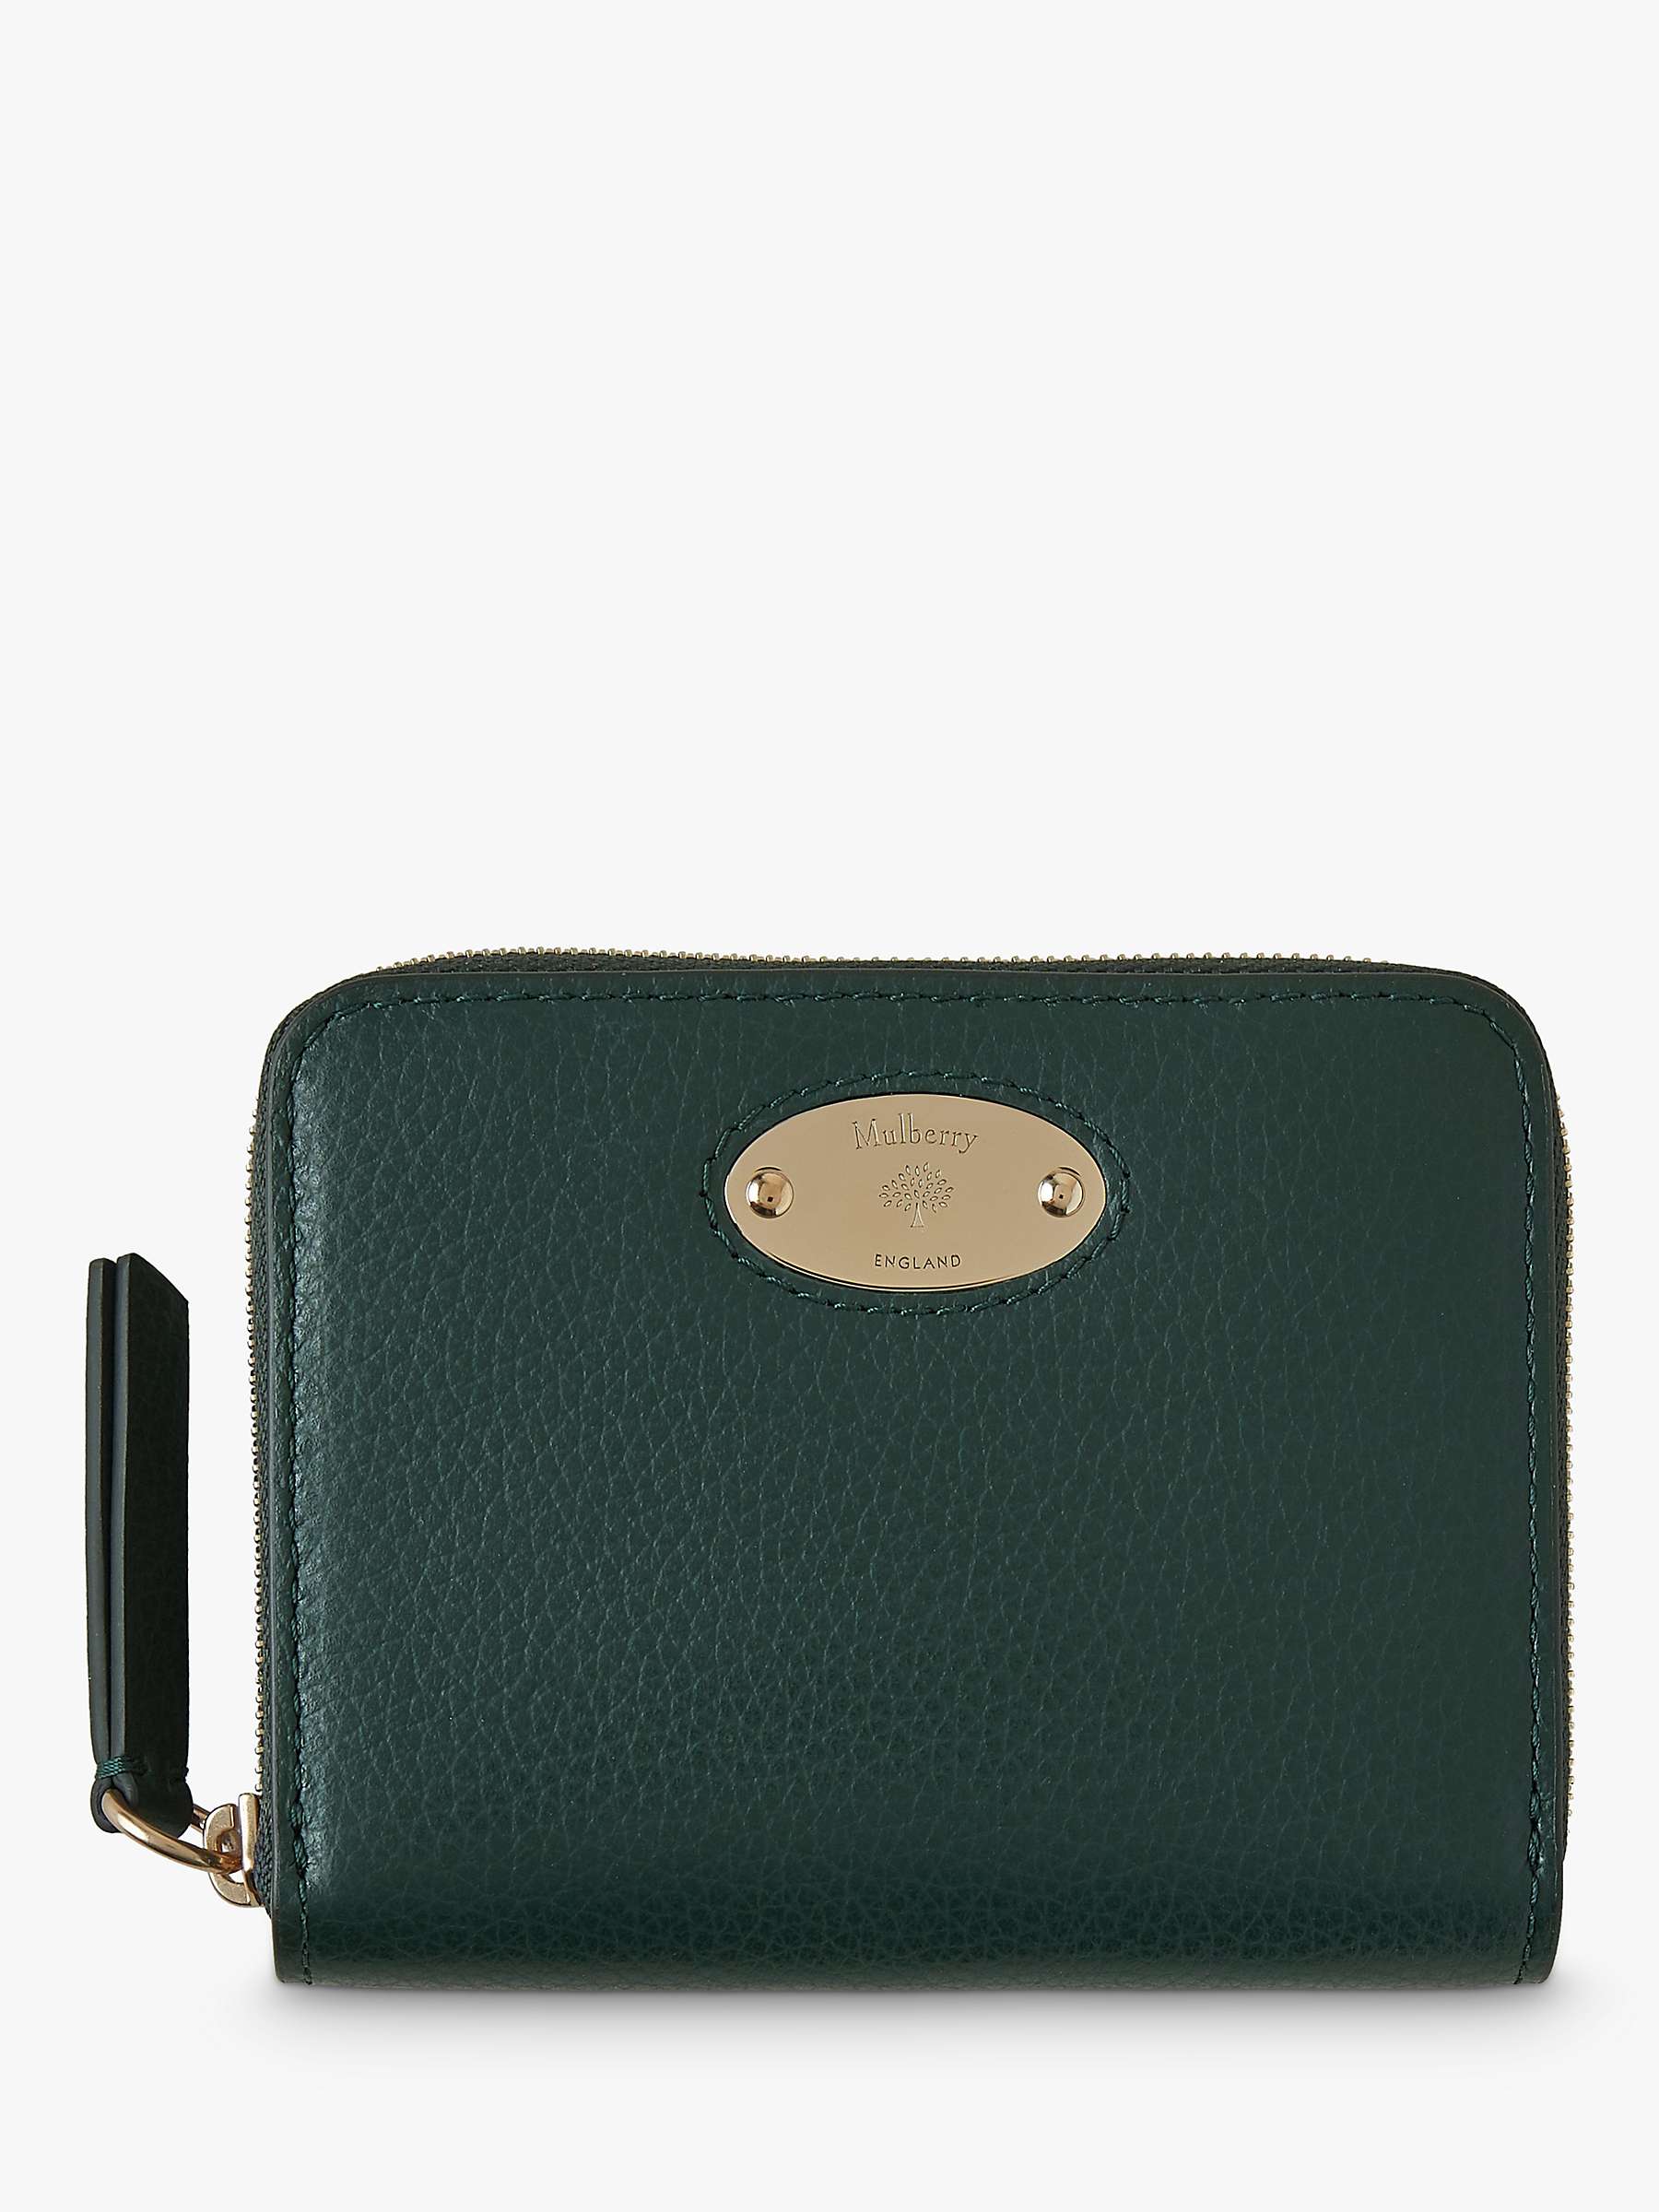 Buy Mulberry Plaque Classic Grain Leather Small Zip Around Purse Online at johnlewis.com